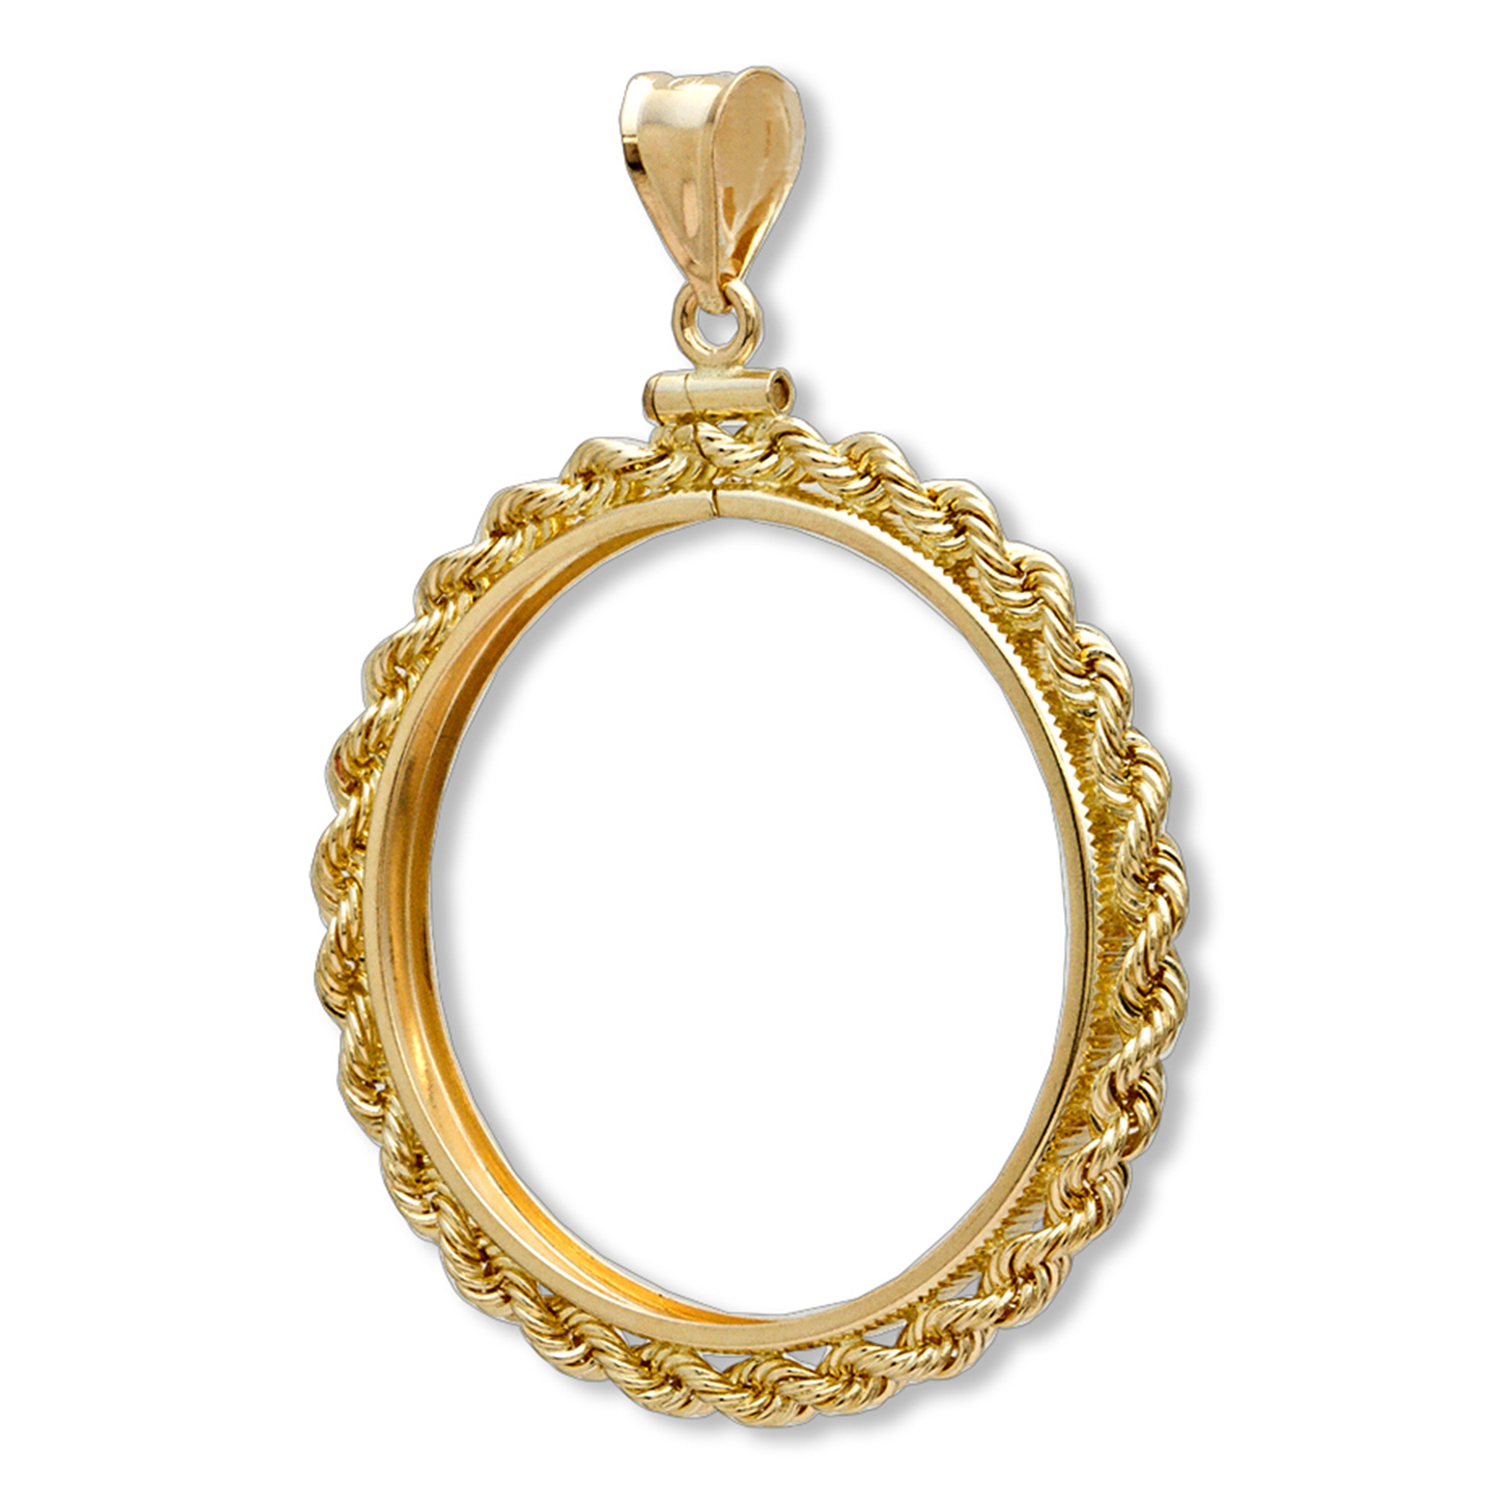 Buy 14K Gold Screw-Top Rope Polished Coin Bezel - 22 mm